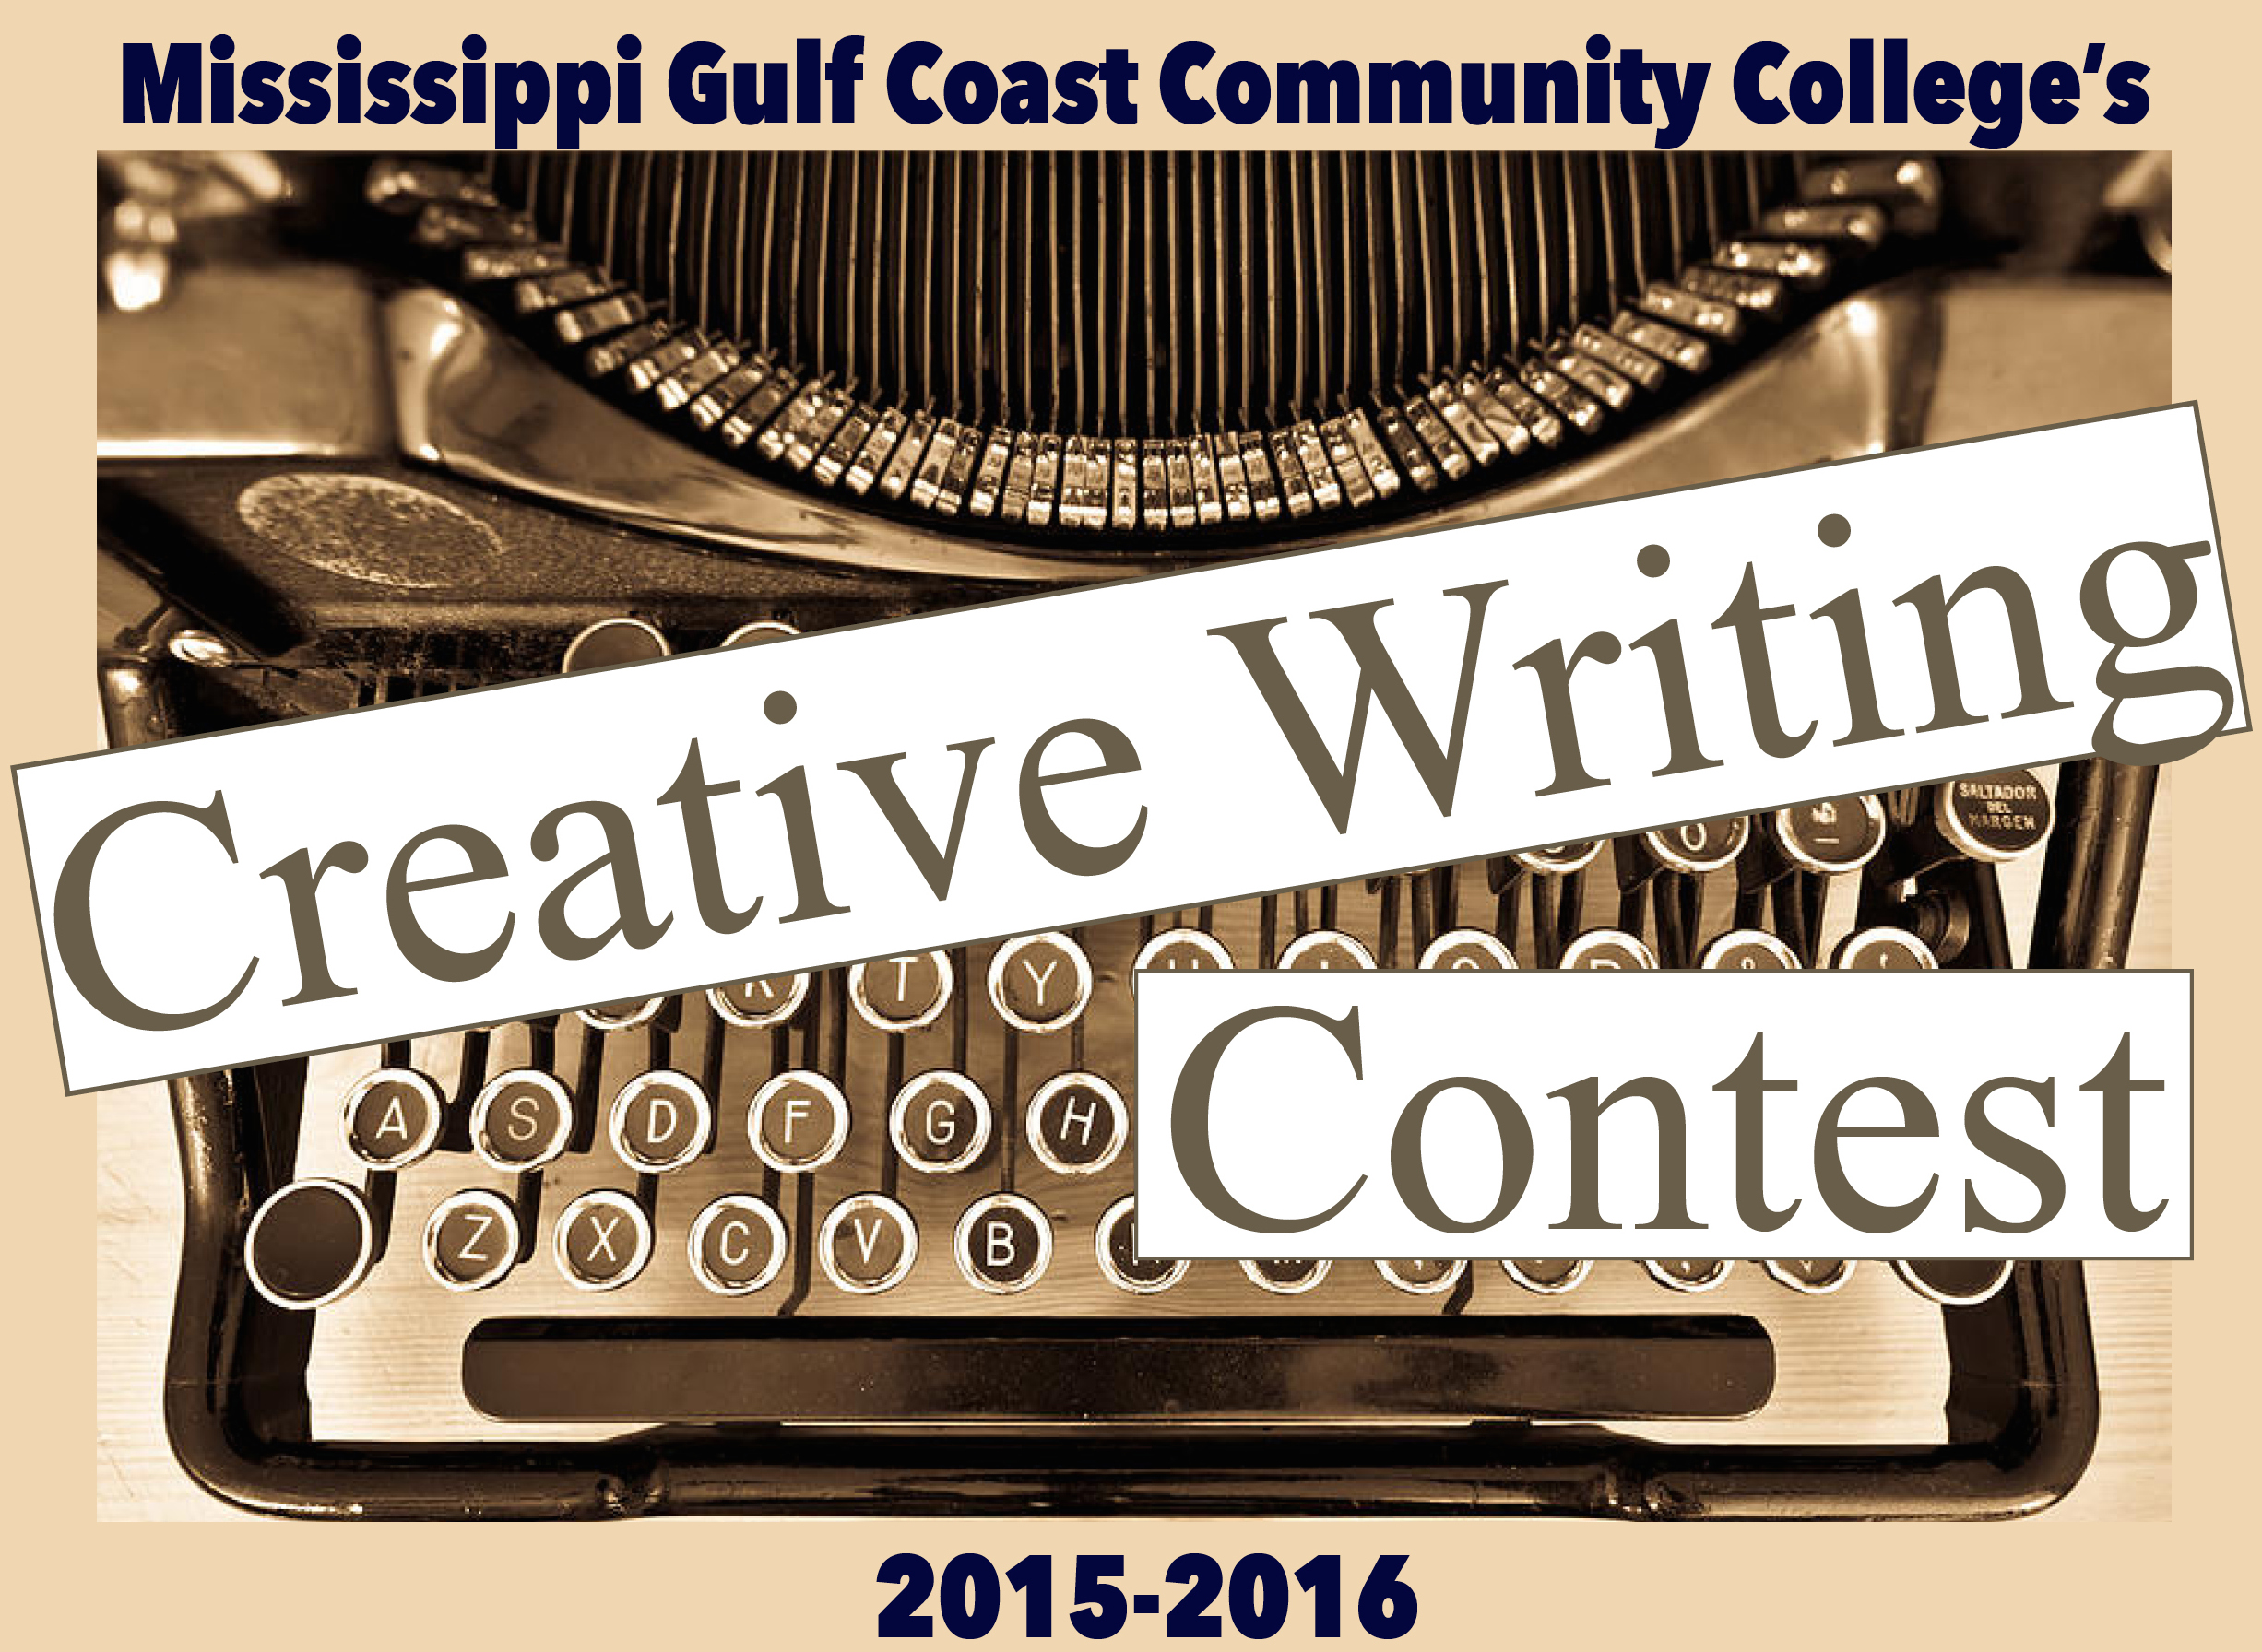 Essay writing contest in mississippi